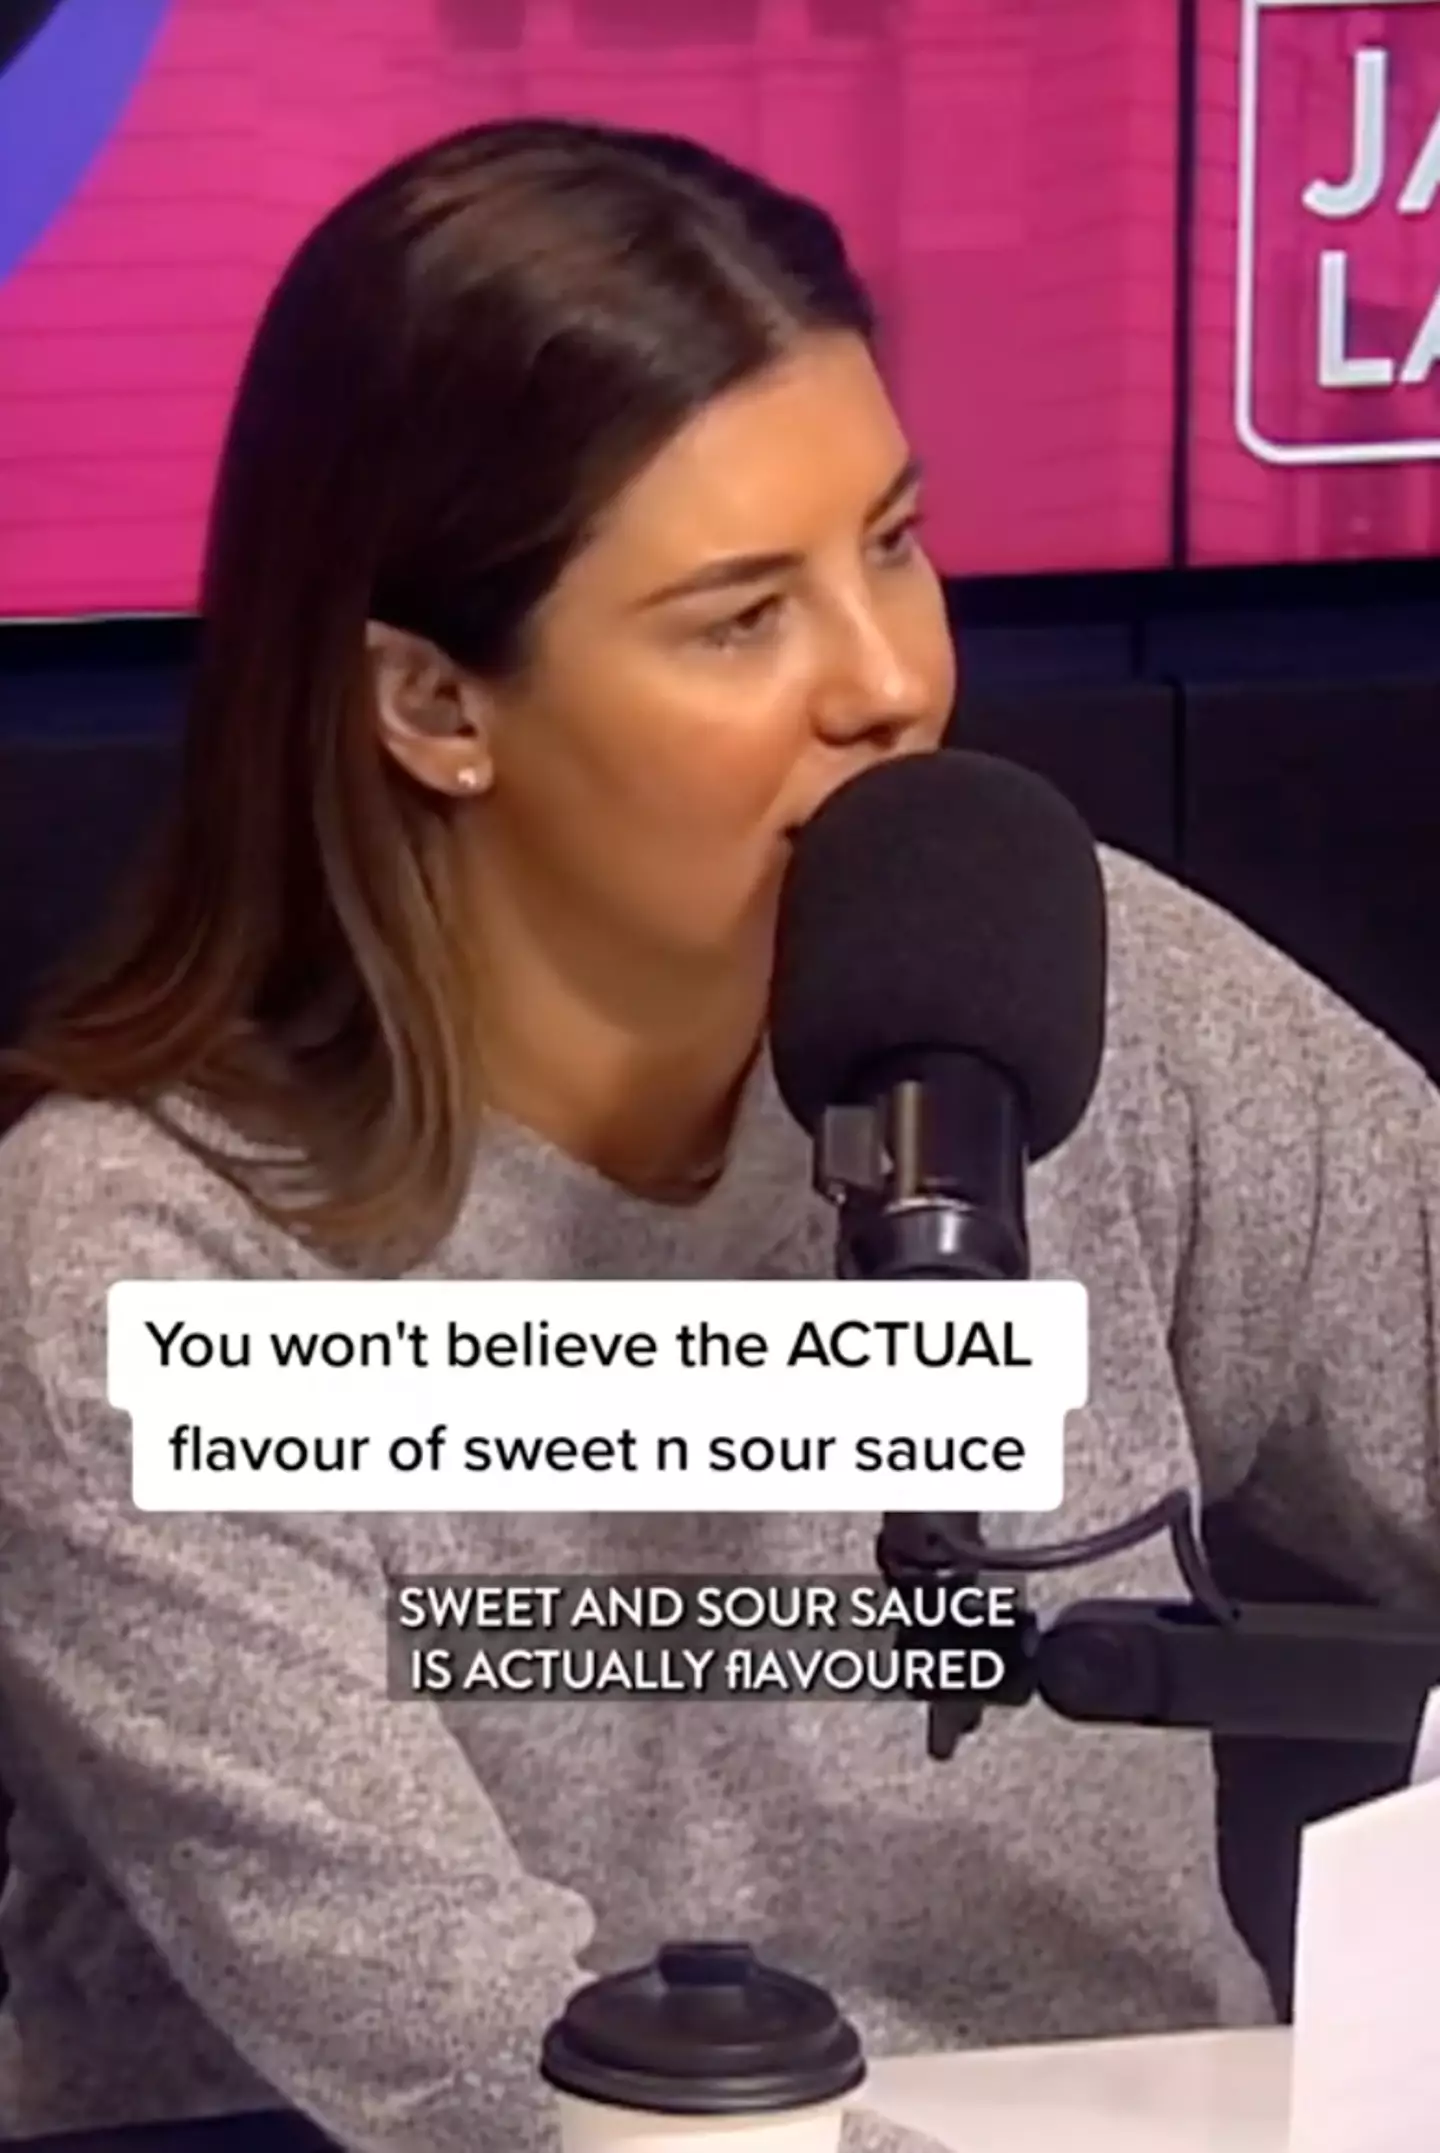 Lauren dealt the crushing blow that the McDonald's Sweet 'n' Sour sauce is made from apricots.